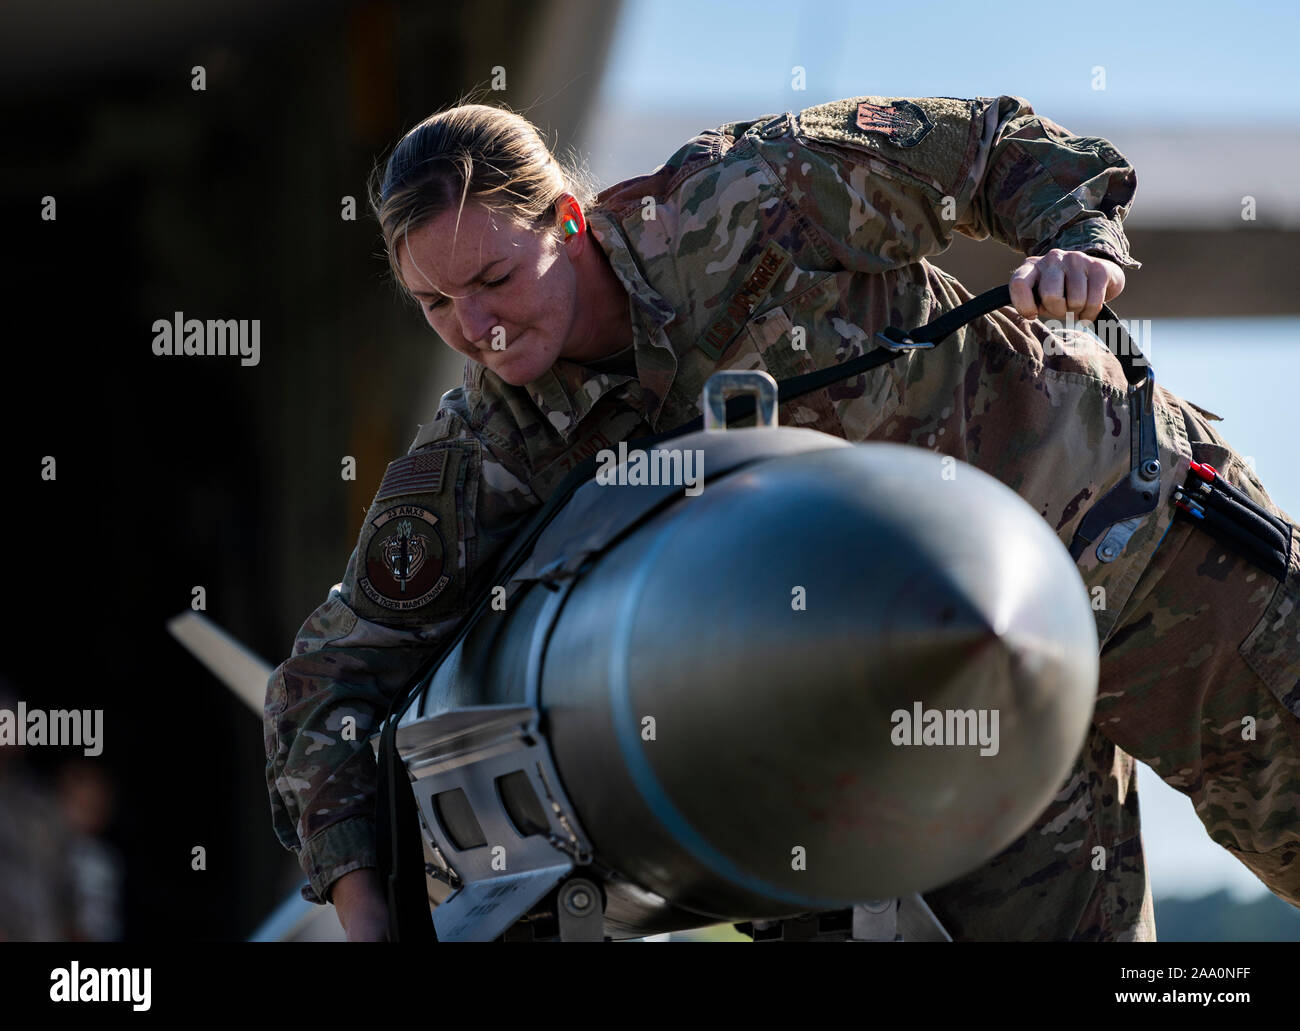 Staff Sgt. Danielle Zandi, 23rd Aircraft Maintenance Squadron weapons load crew chief, conducts a weapons-load demonstration during the 2019 Thunder Over South Georgia open house Nov. 3, 2019, at Moody Air Force Base, Ga. Approximately 50,000 people attended the two-day open house, which was headlined by the U.S. Navy Blue Angels demonstration team. Stock Photo